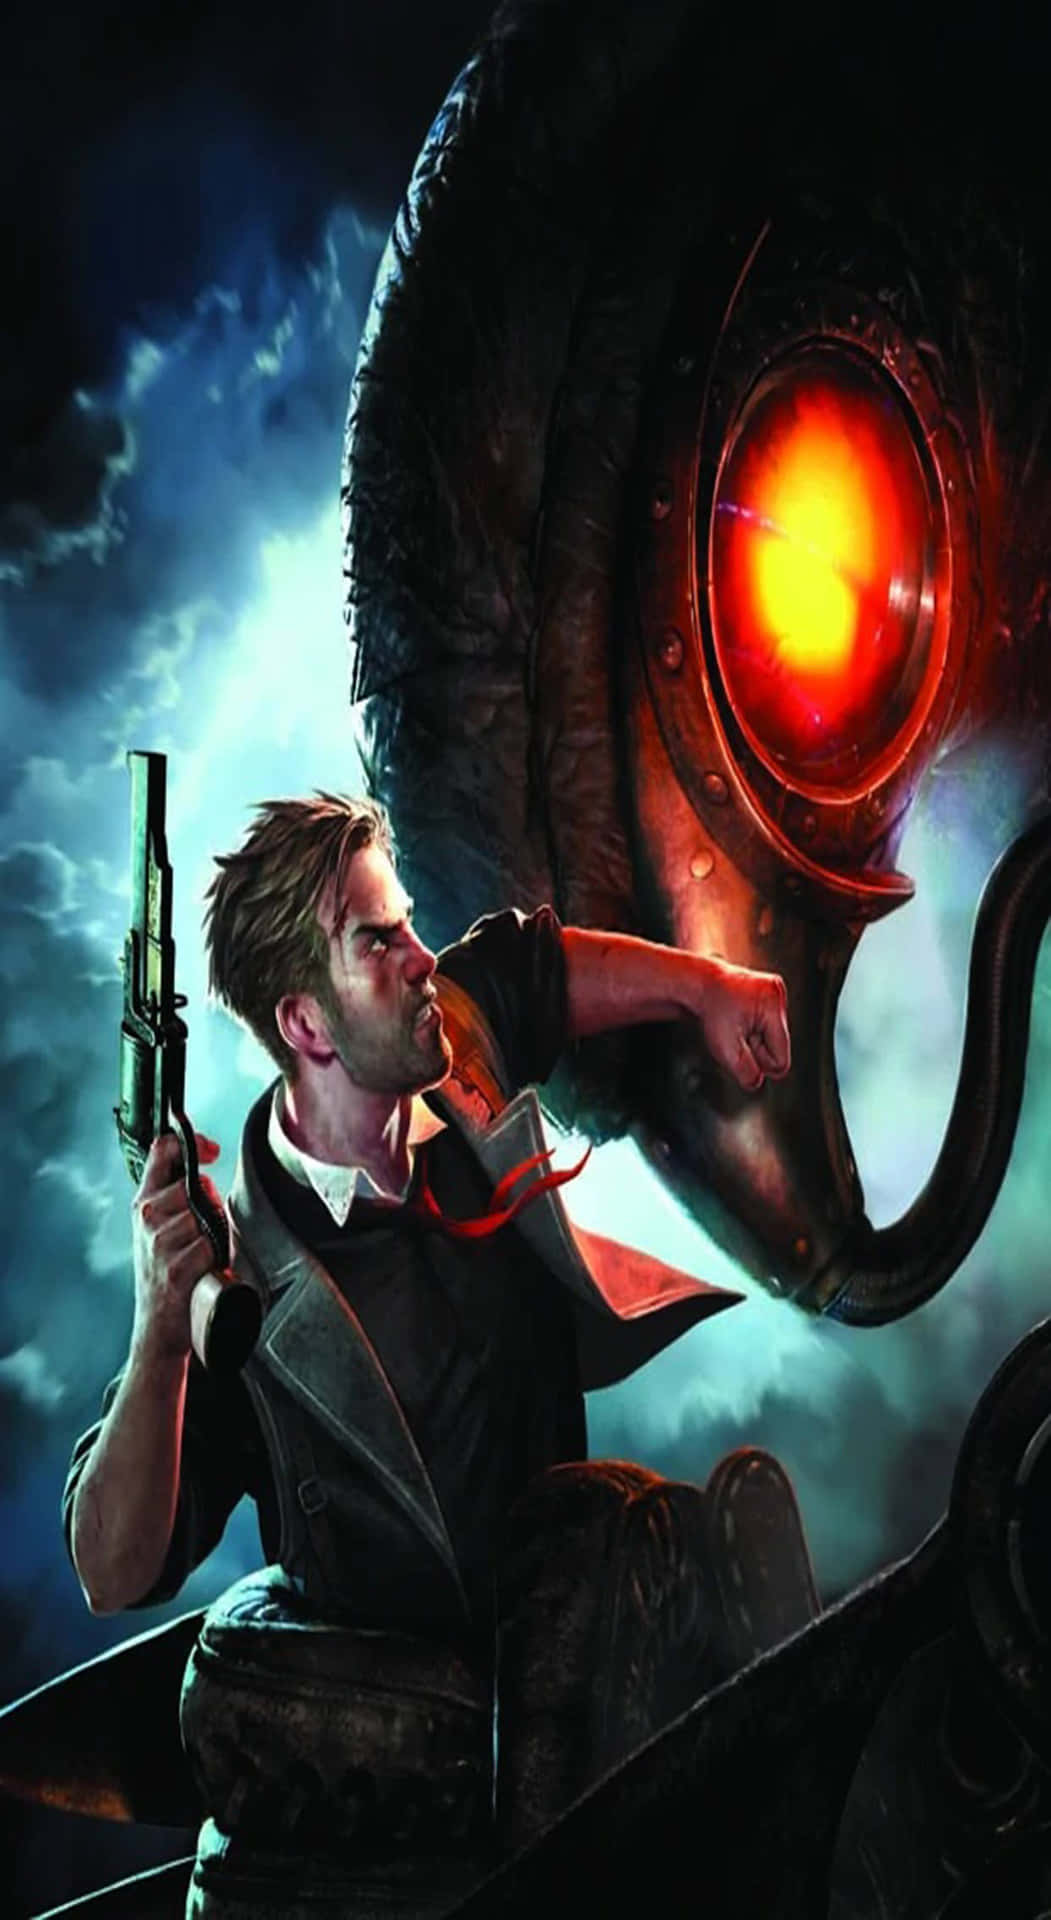 Get lost in a thrilling digital dystopia with 4K Bioshock on your iPhone. Wallpaper